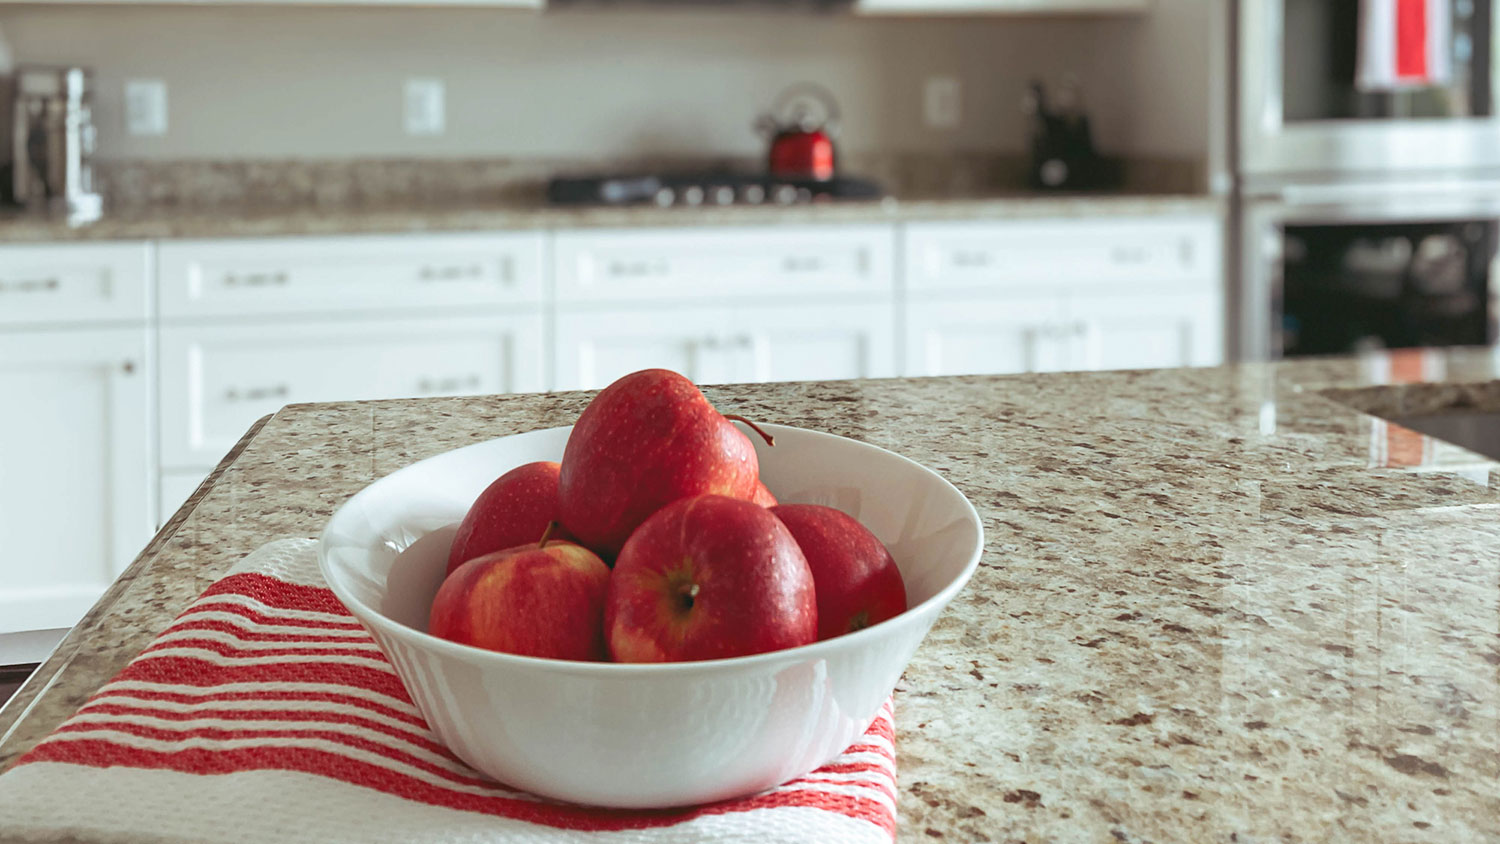 A bowl of apples sits on granite countertops